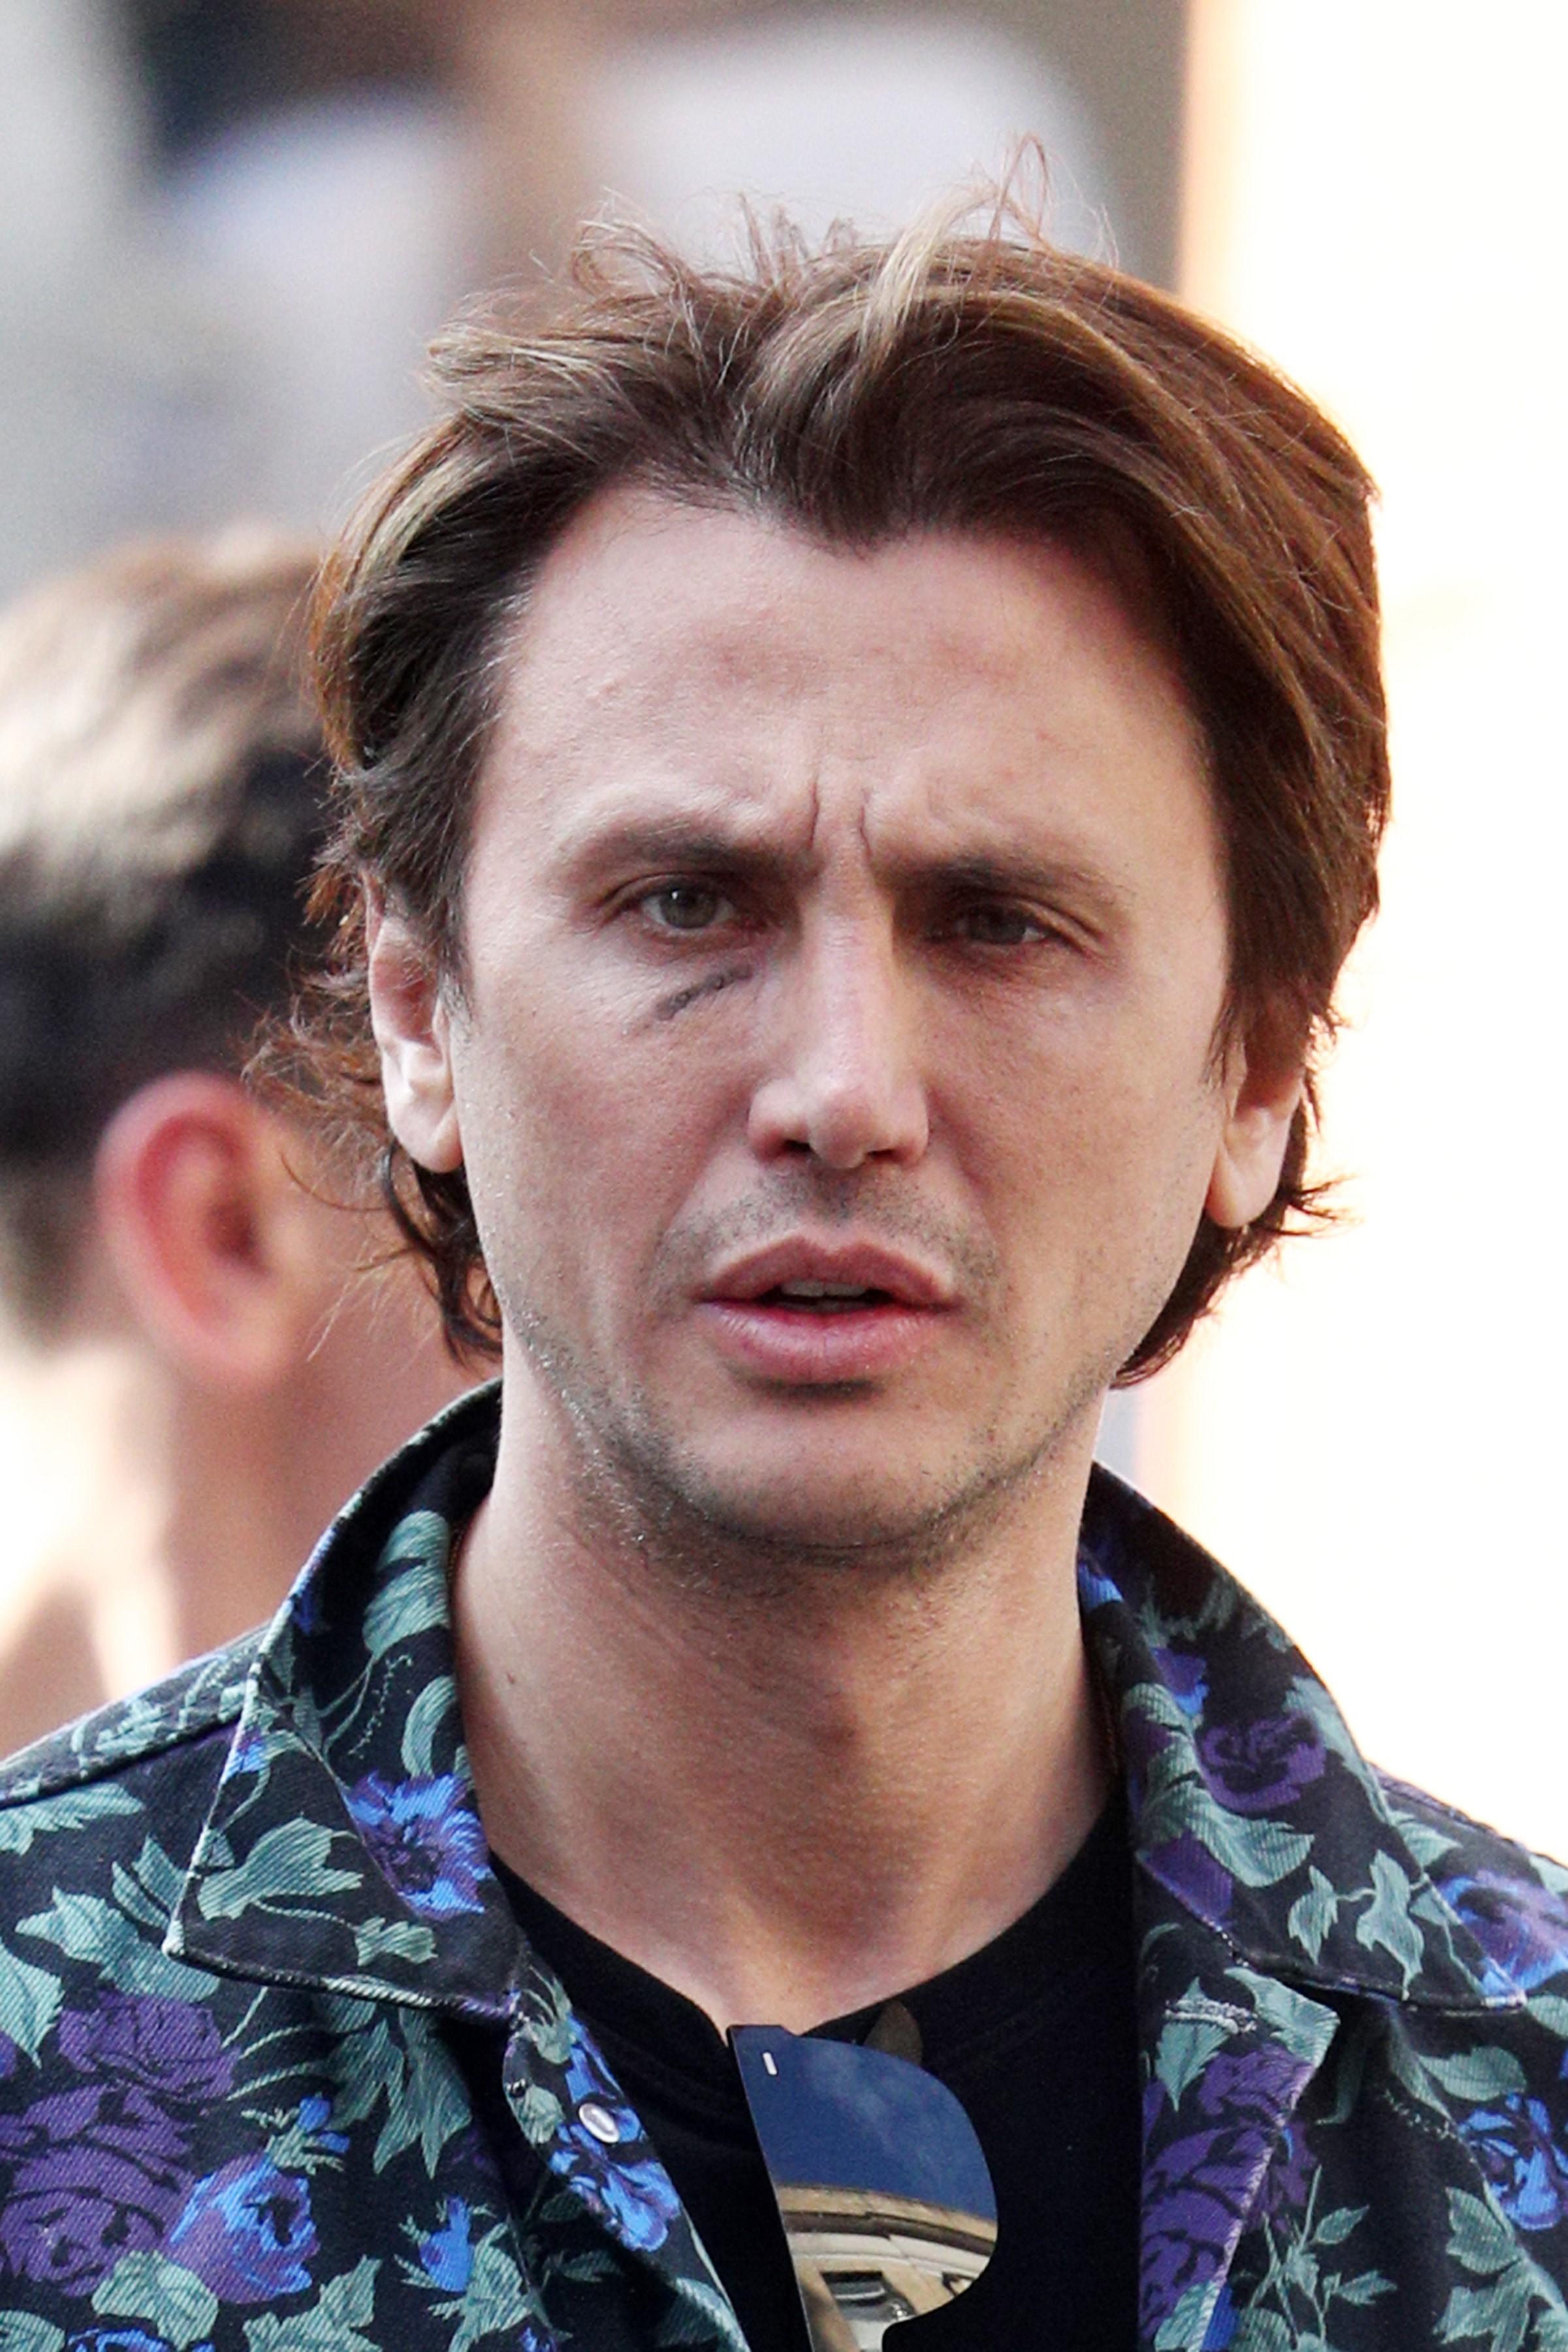 Ouch Jonathan Cheban Caught With Nasty Bruise Under His Eye. 